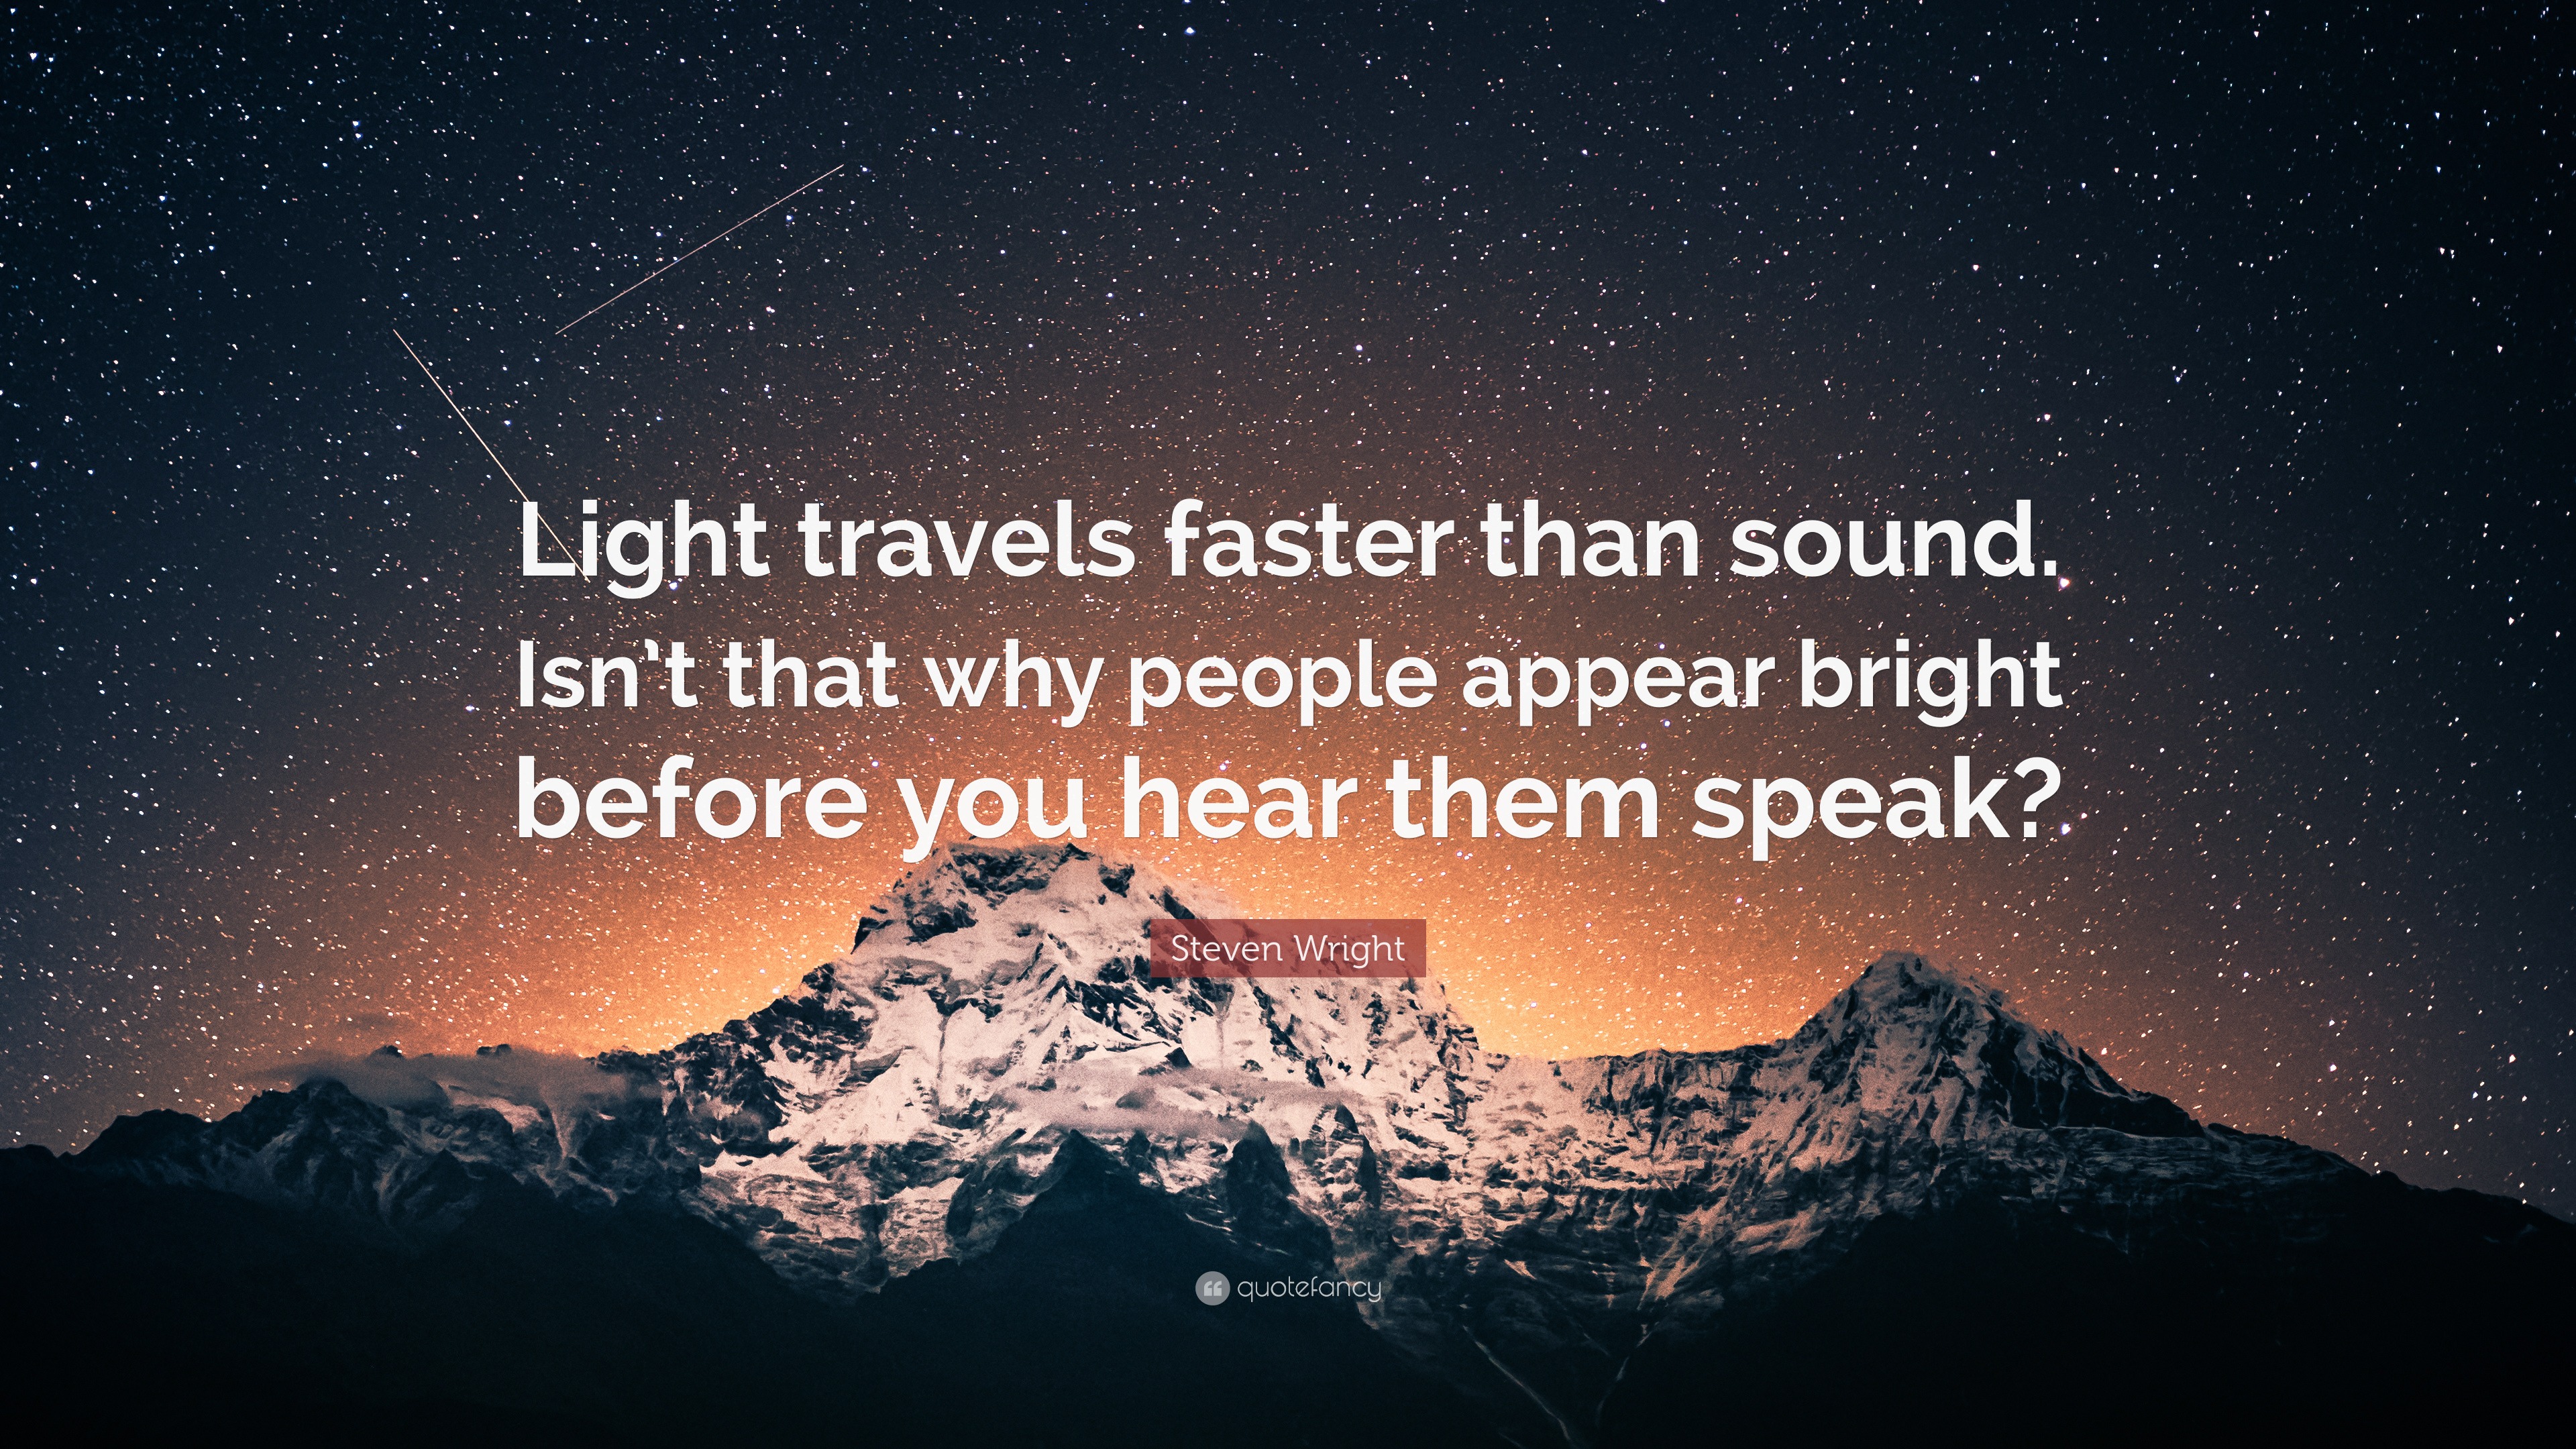 is light travel faster than sound